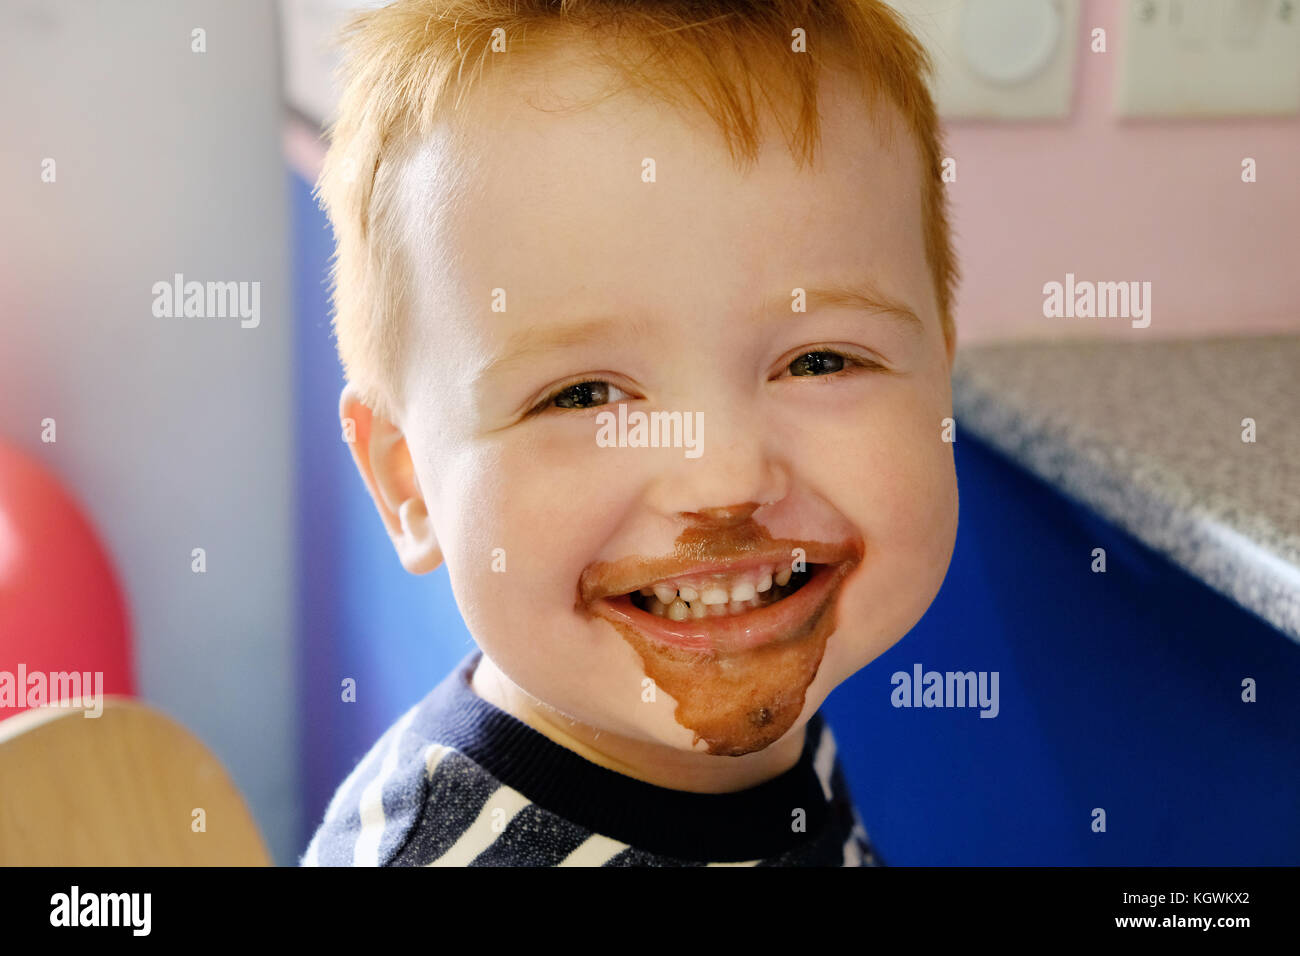 A young happy boy, smiling widely, his face covered in chocolate ice cream having just eaten and a chocolate ice cream treat Stock Photo